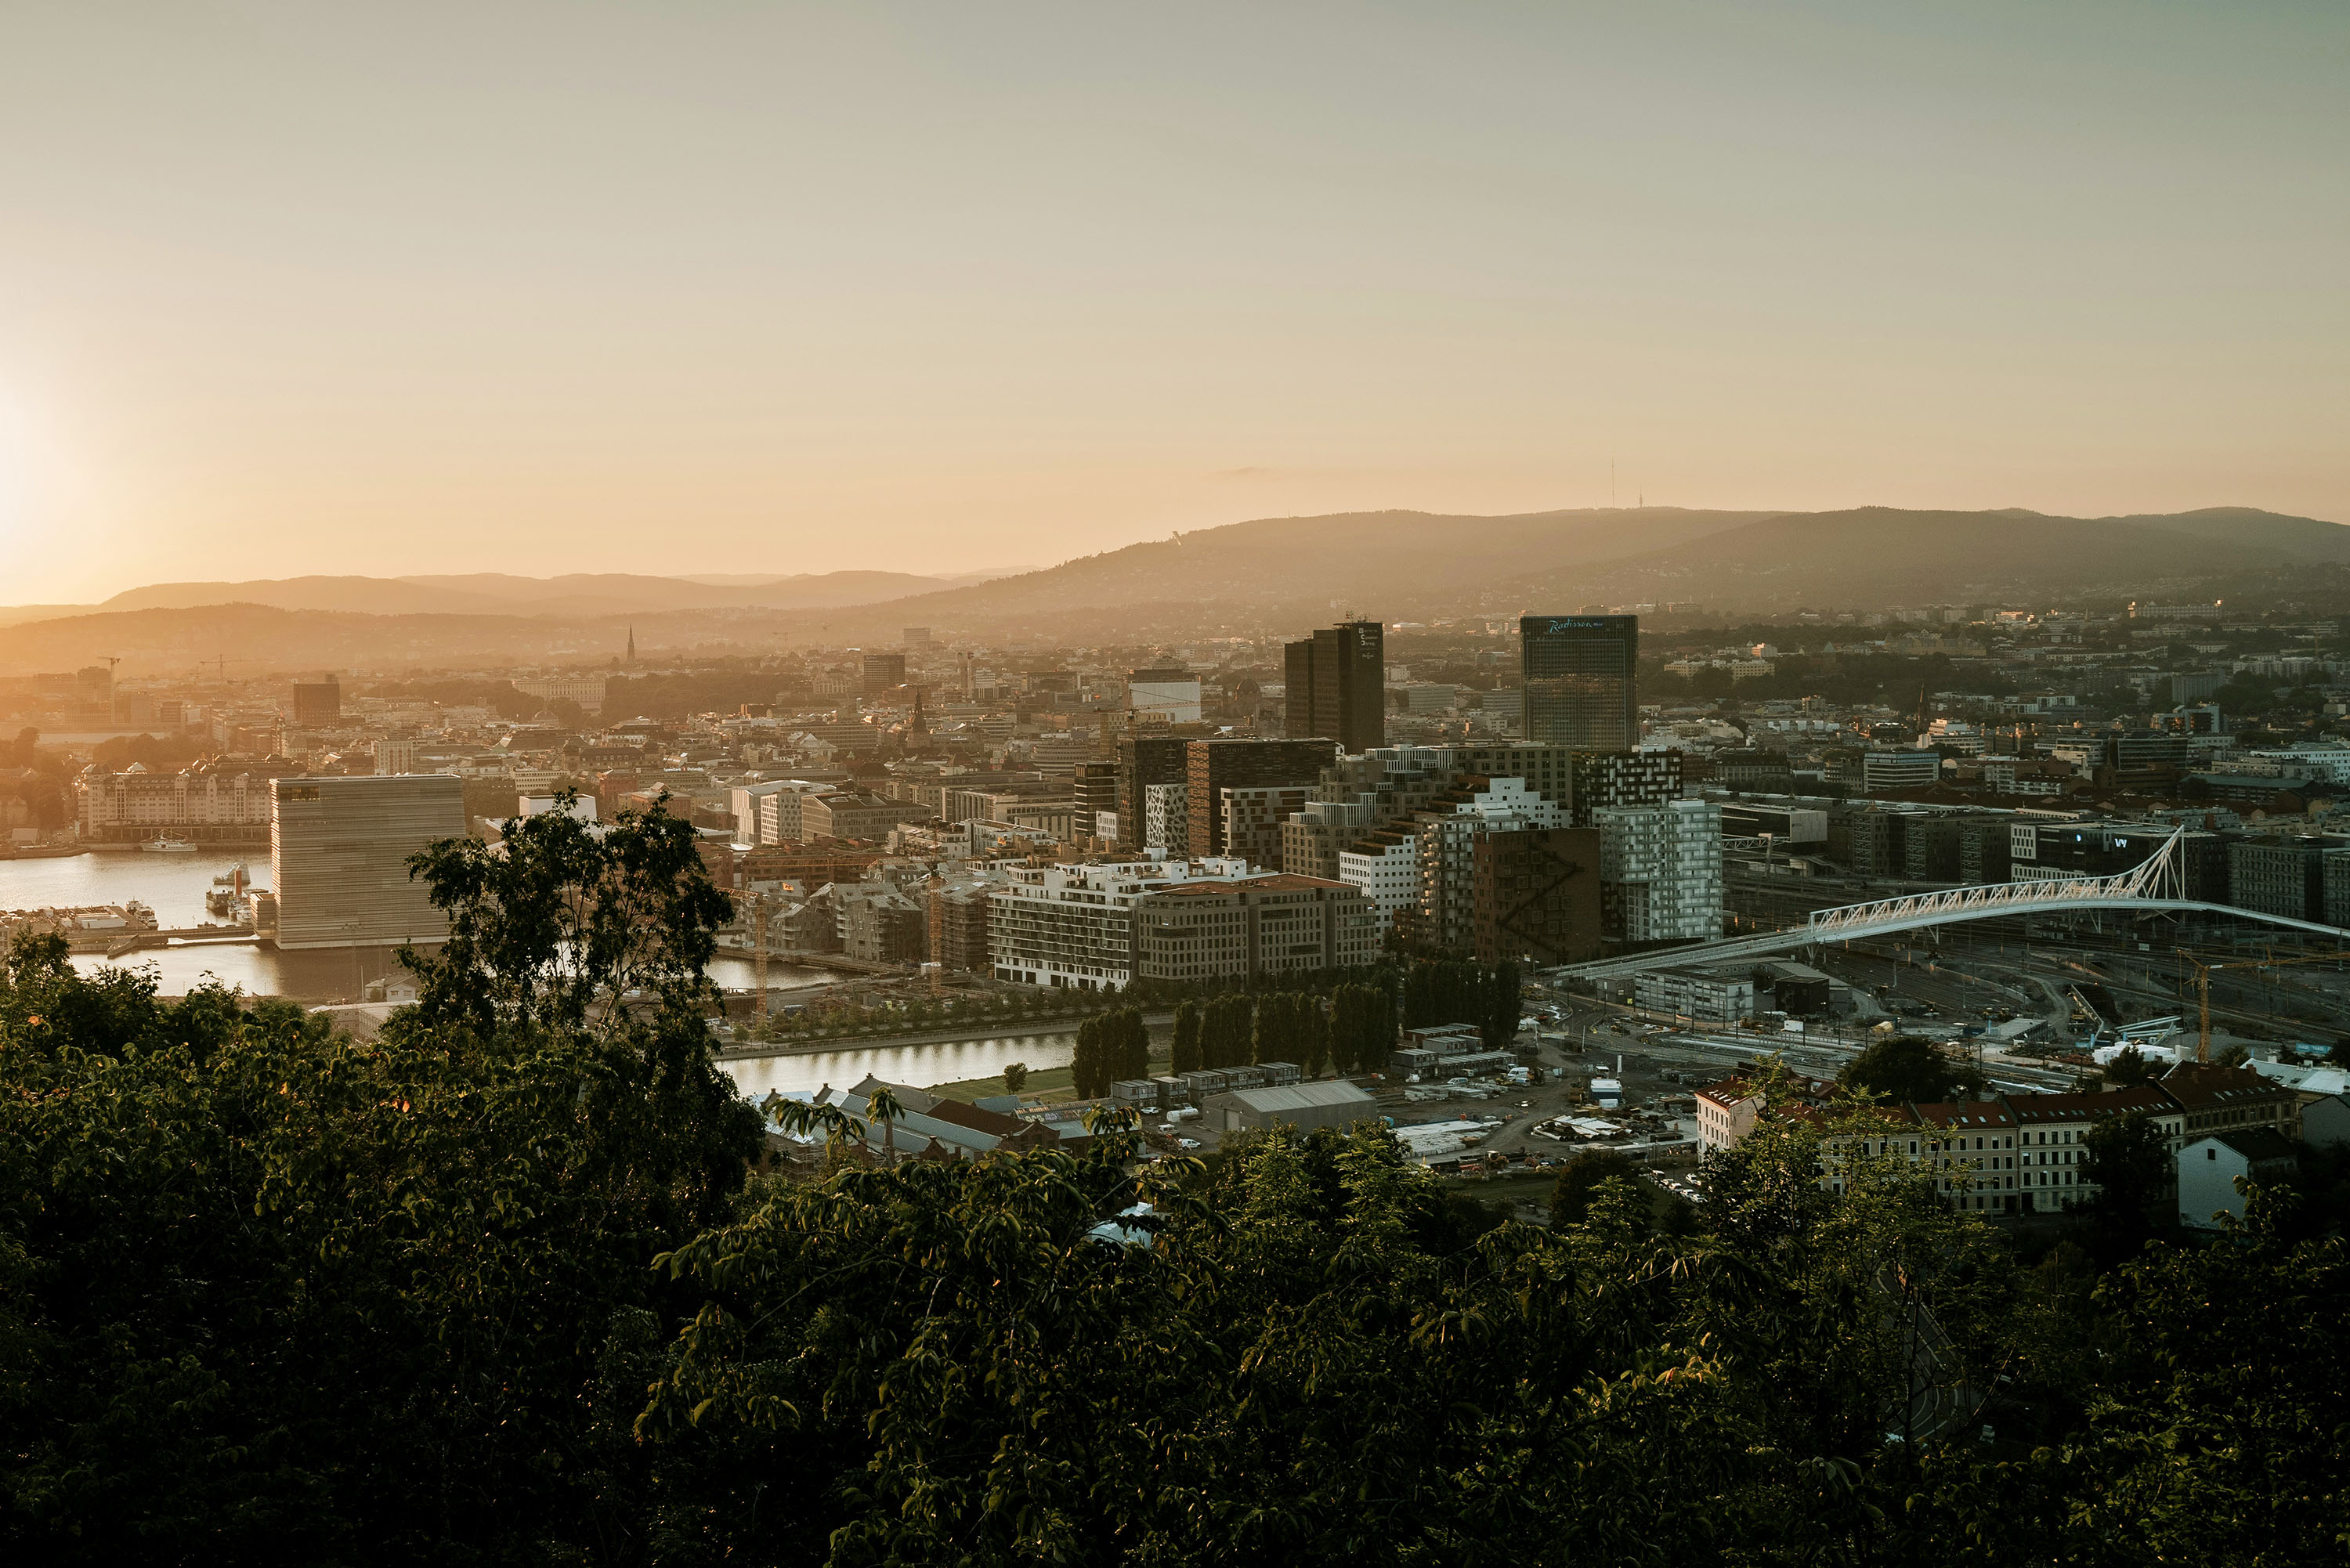 Aerial view of central Oslo at sunset with trees in the foreground.